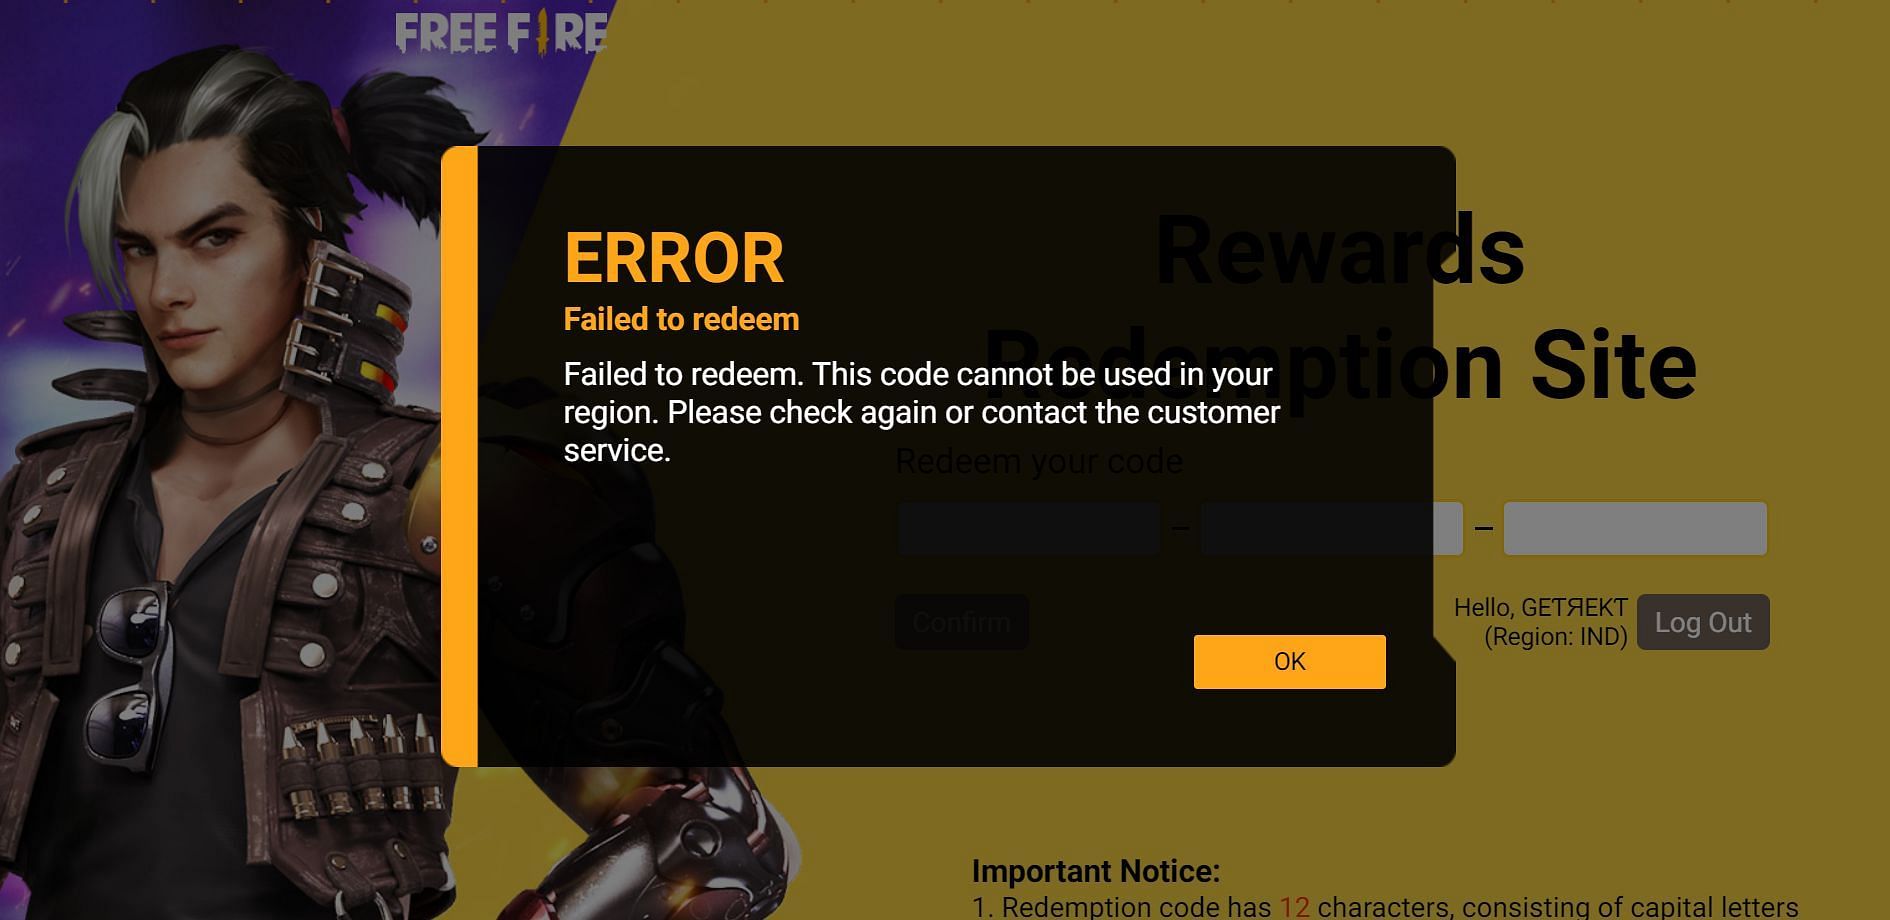 One of the common errors that players may encounter during the redemption (Image via Free Fire)